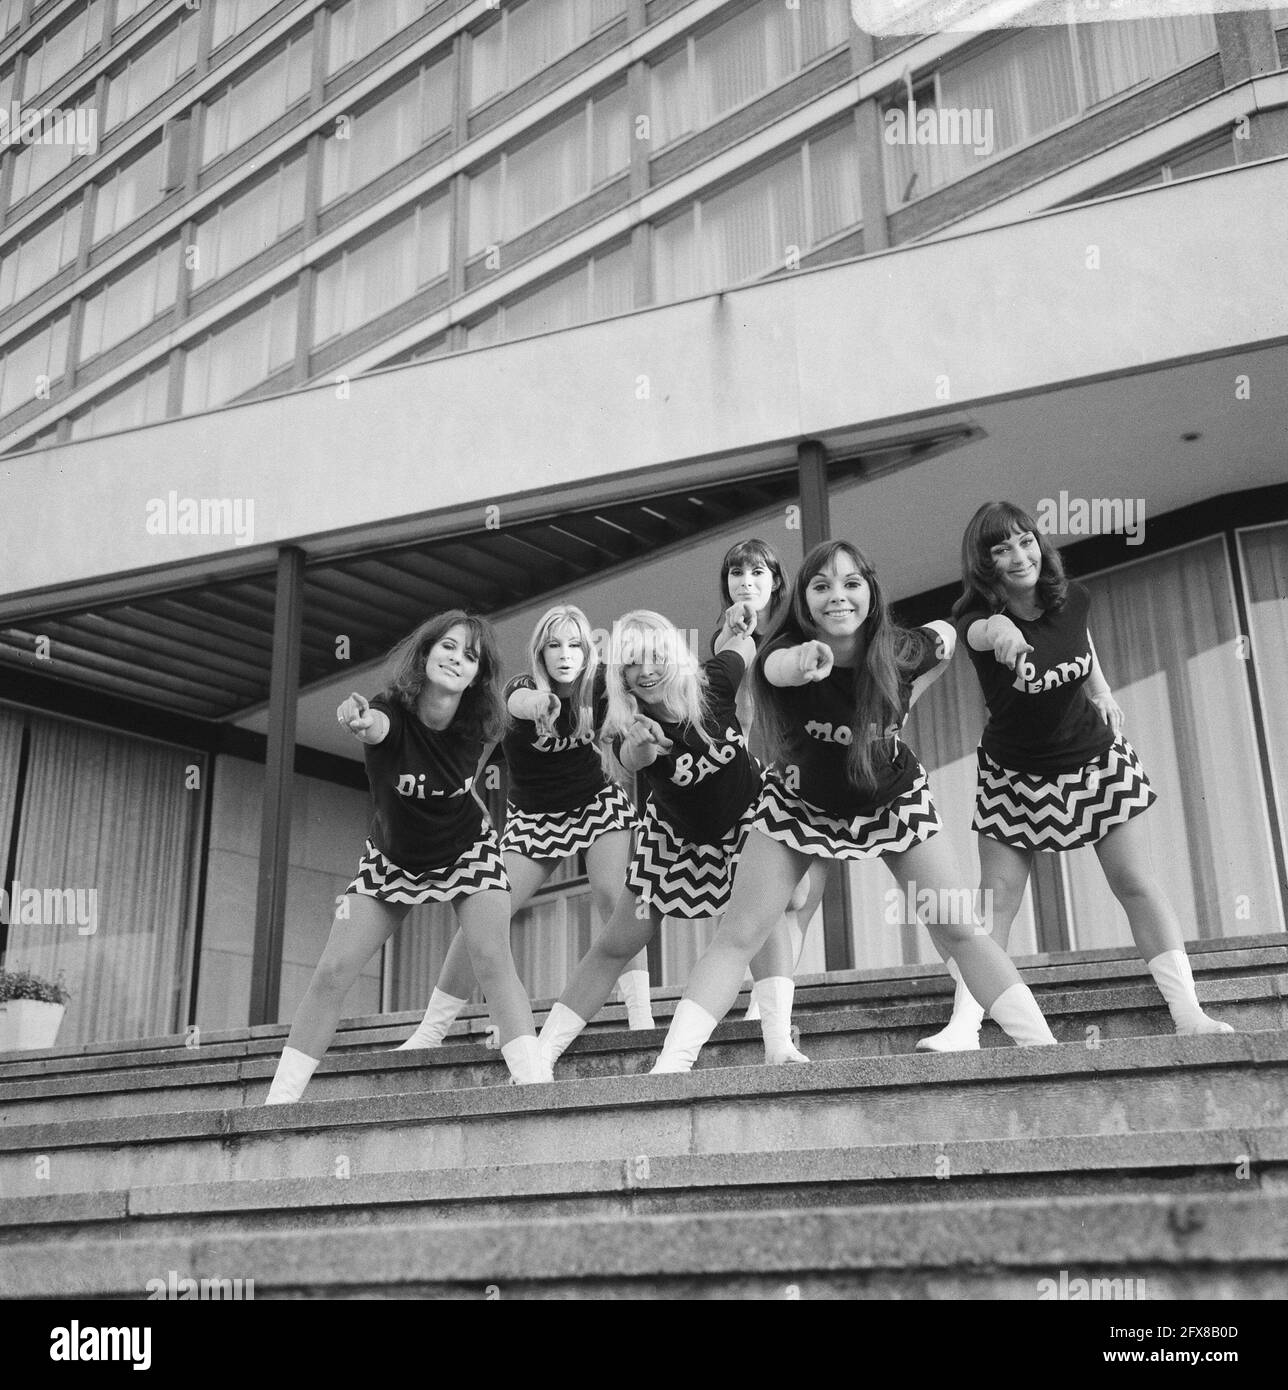 Beat Girls dance in front of Hilton hotel entrance, September 22, 1966, dancers, hotels, The Netherlands, 20th century press agency photo, news to remember, documentary, historic photography 1945-1990, visual stories, human history of the Twentieth Century, capturing moments in time Stock Photo